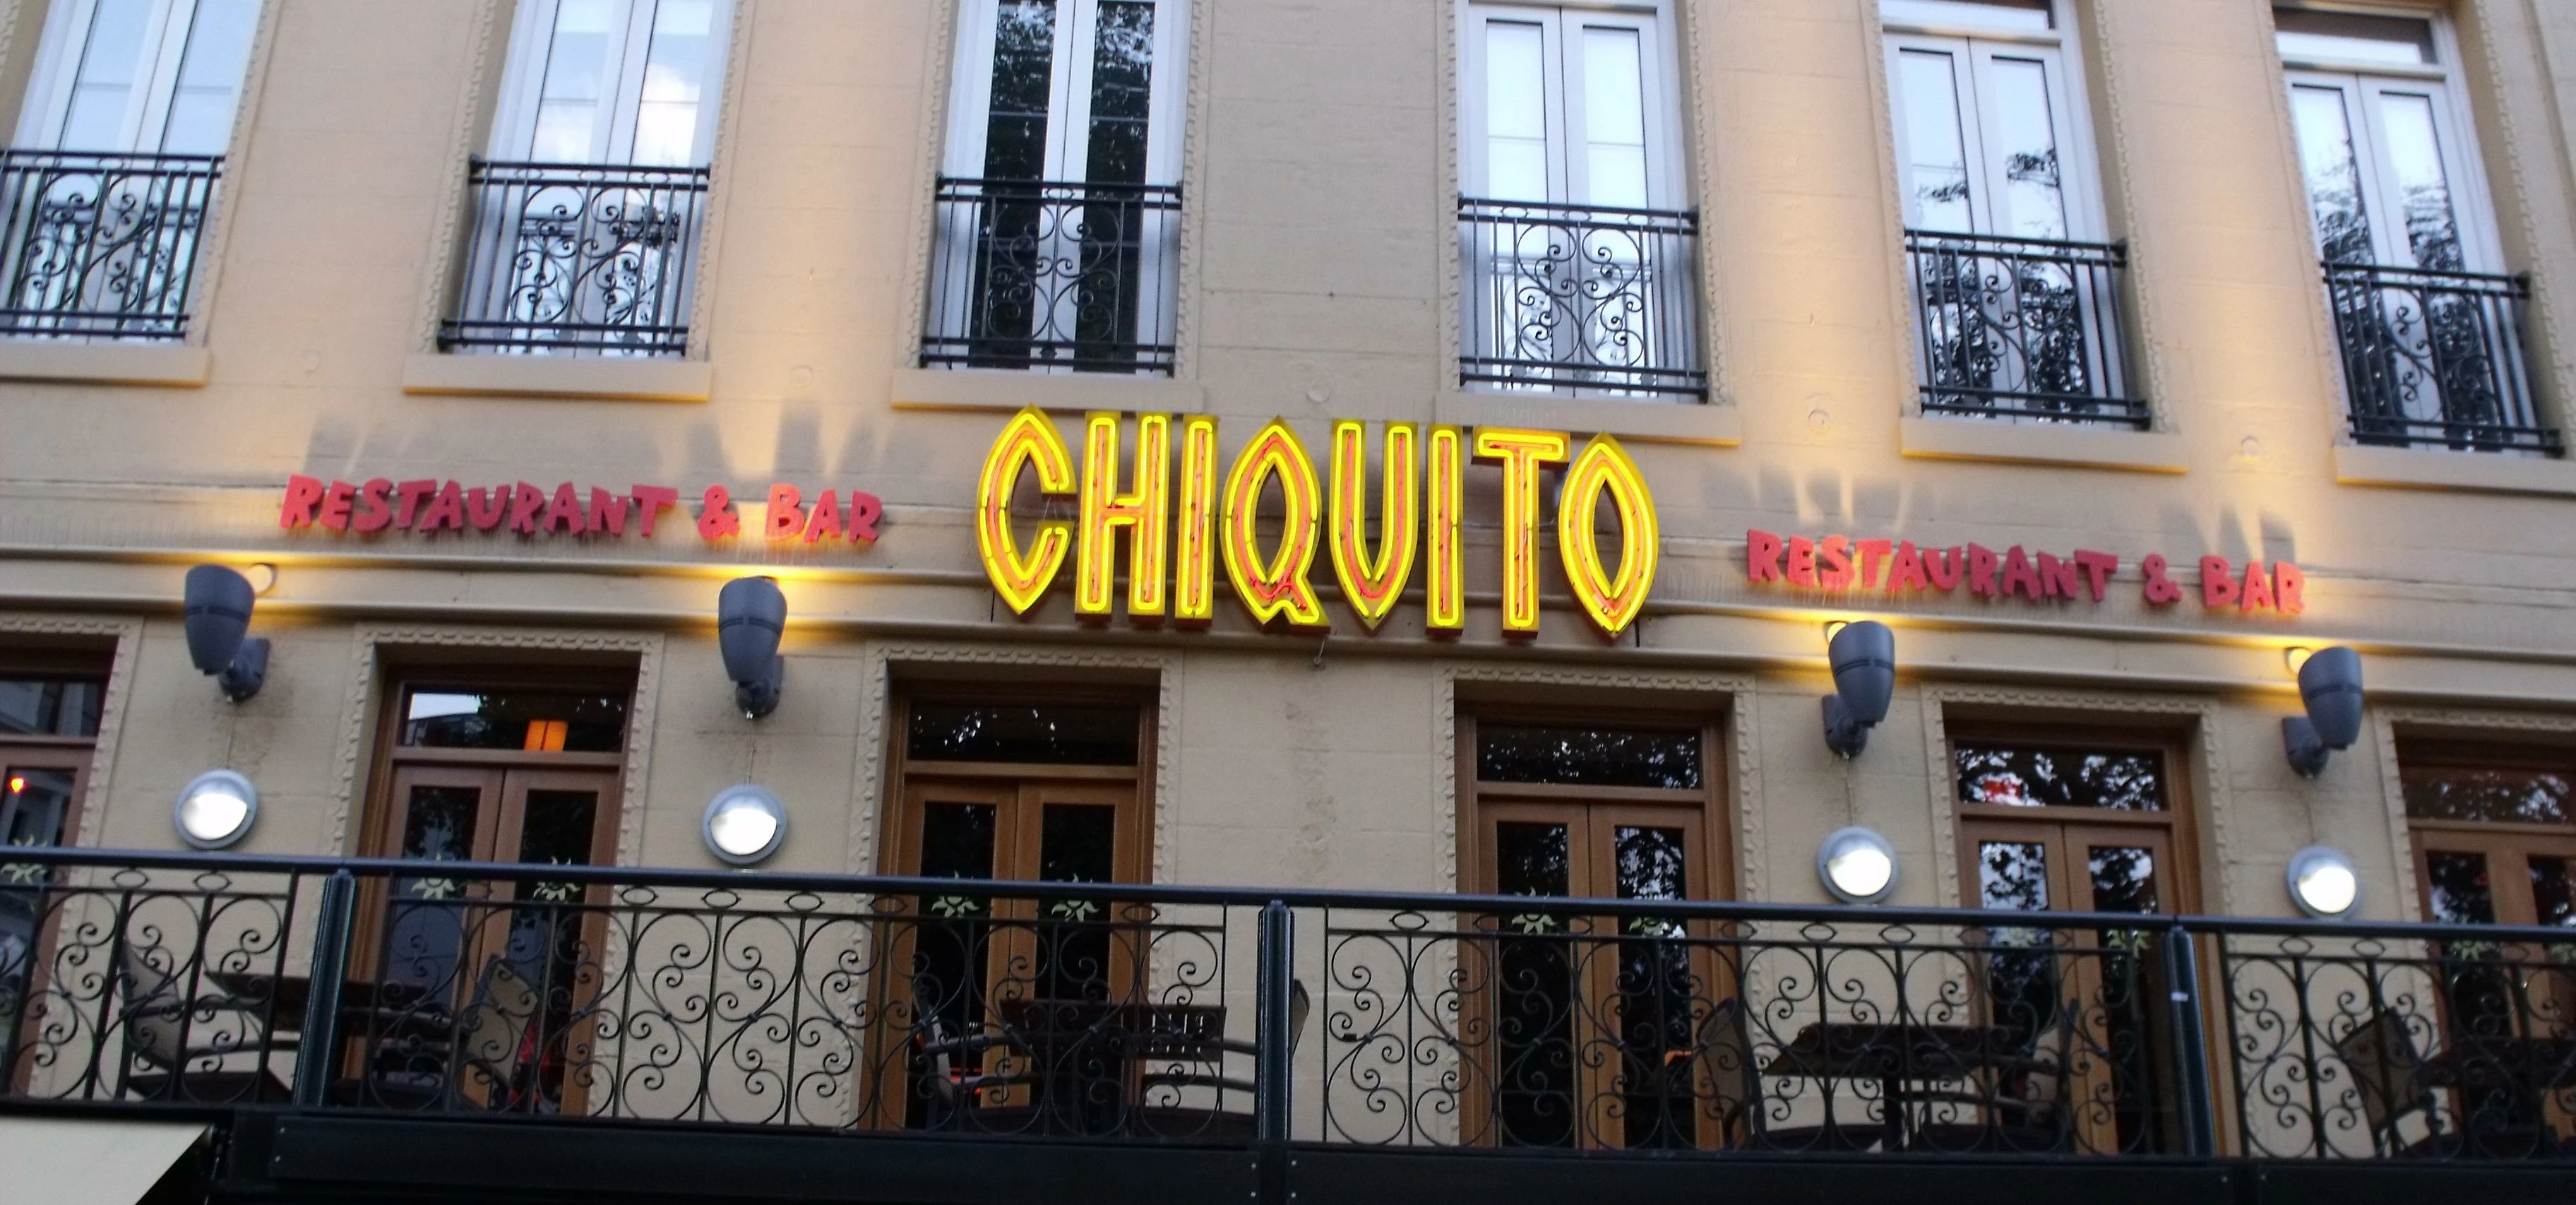 Chiquito - Leicester Square, London